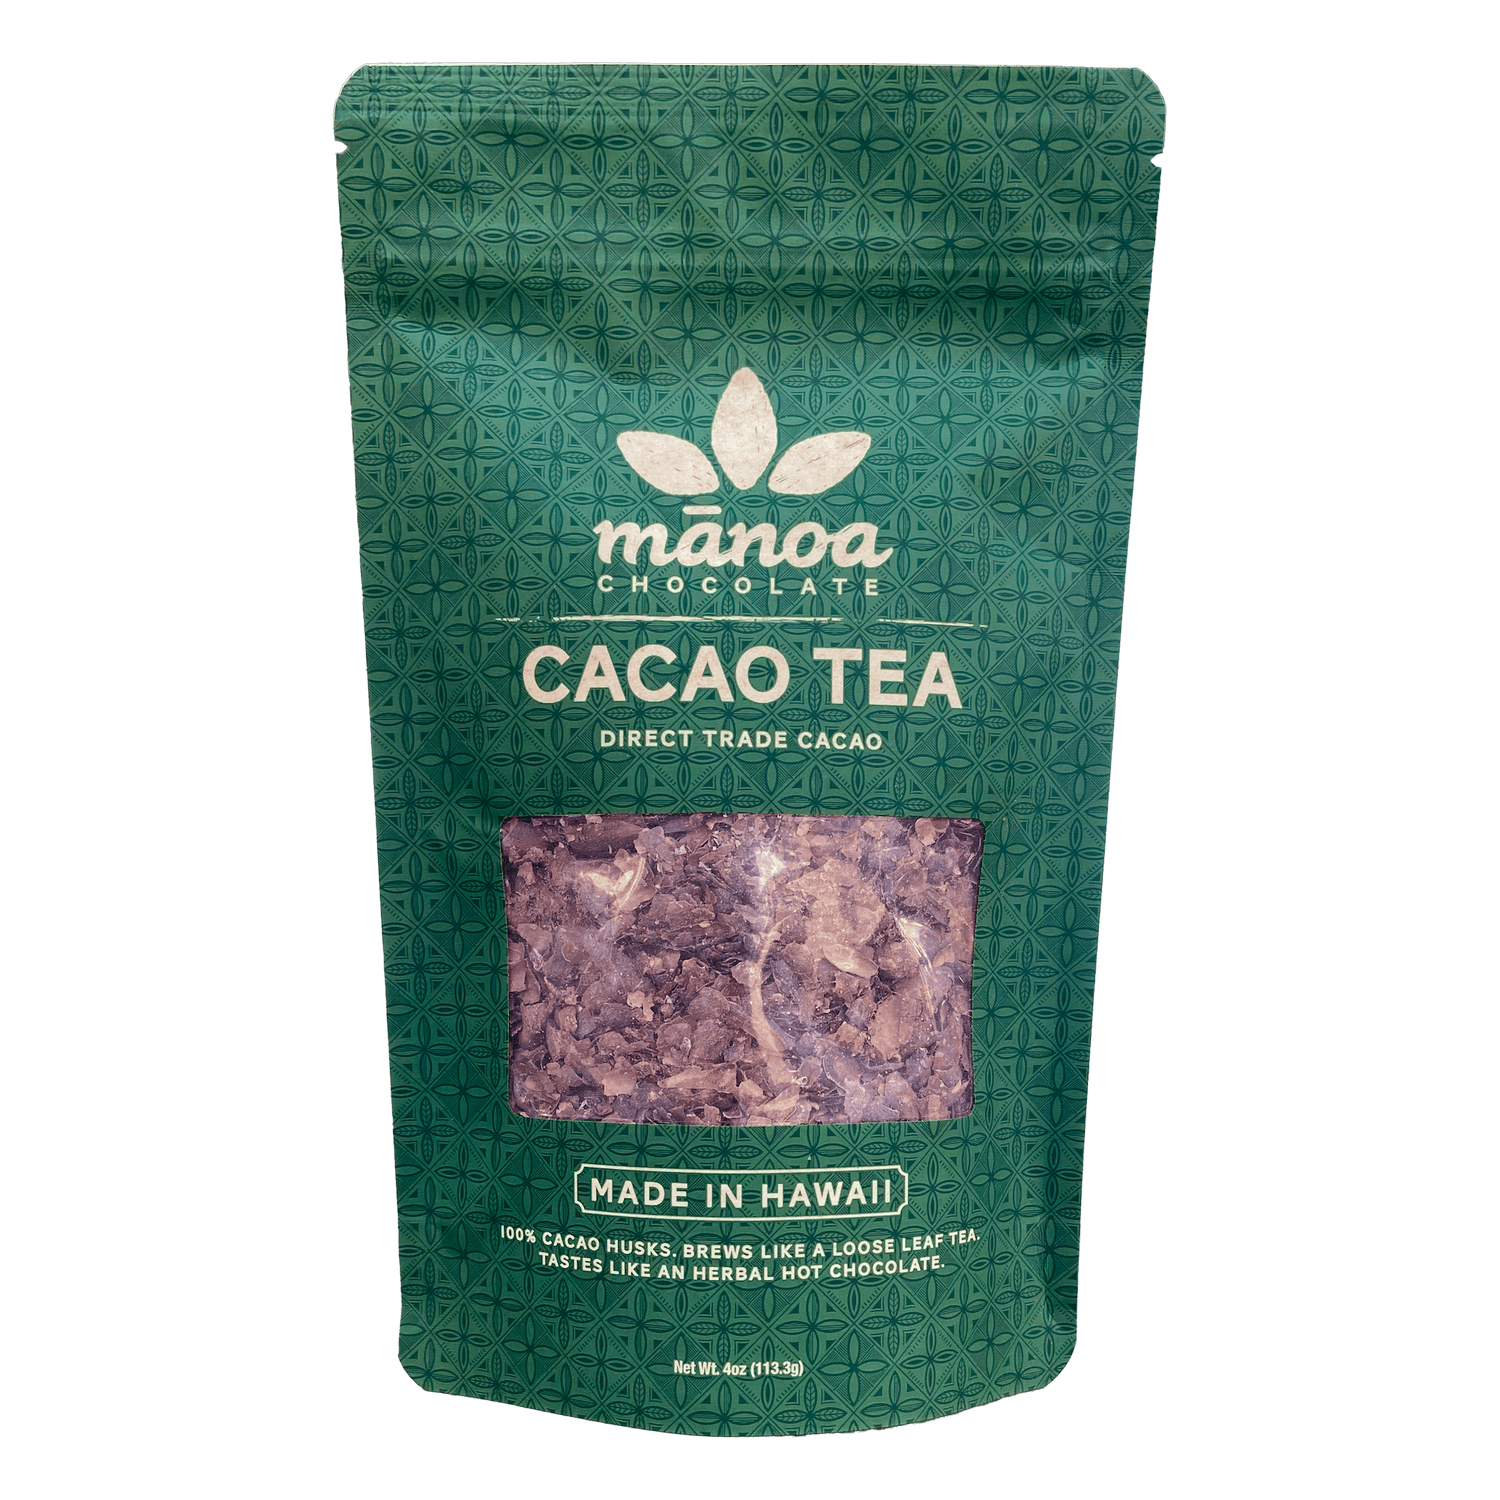 Image of green, 4oz pouch of cacao tea